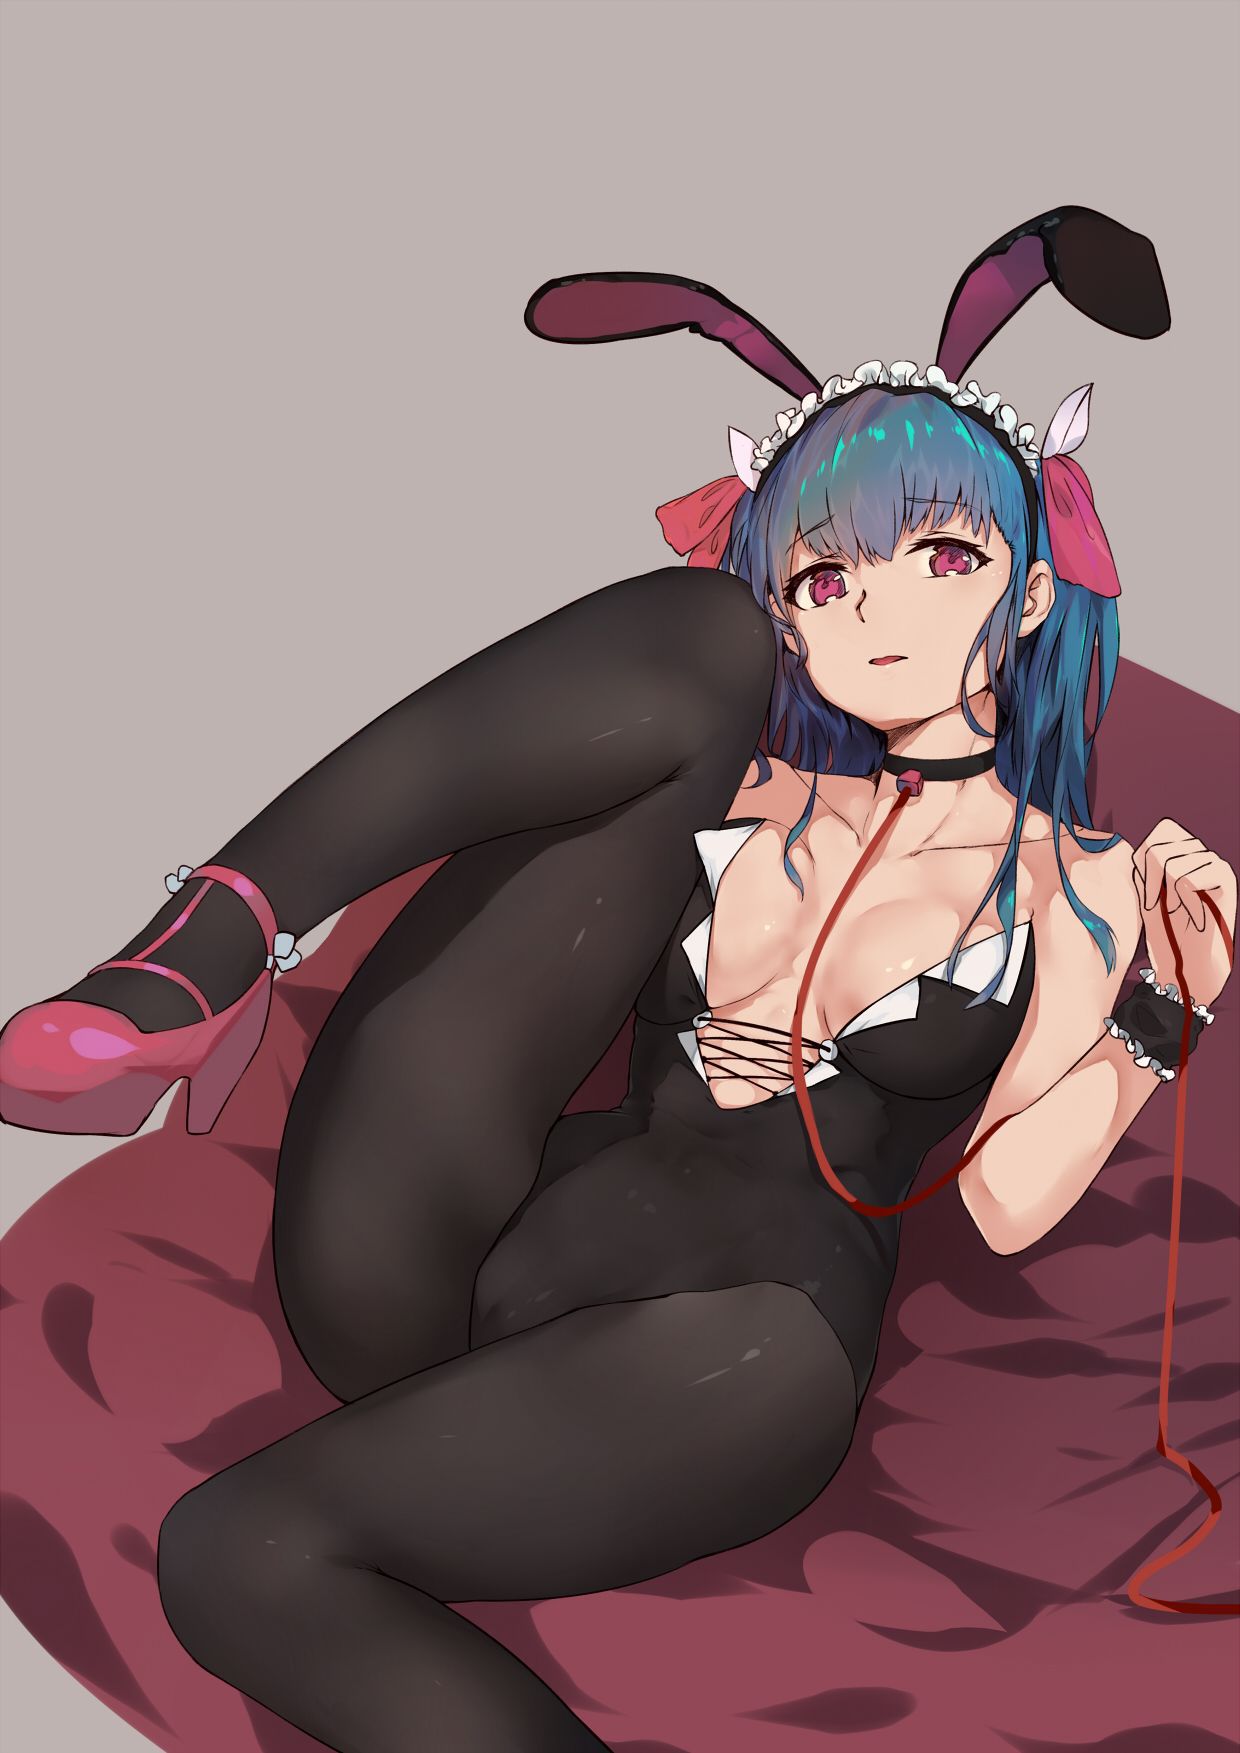 [Second] sexy bunny girl figure secondary erotic image part 32 [Bunny Girl] 30